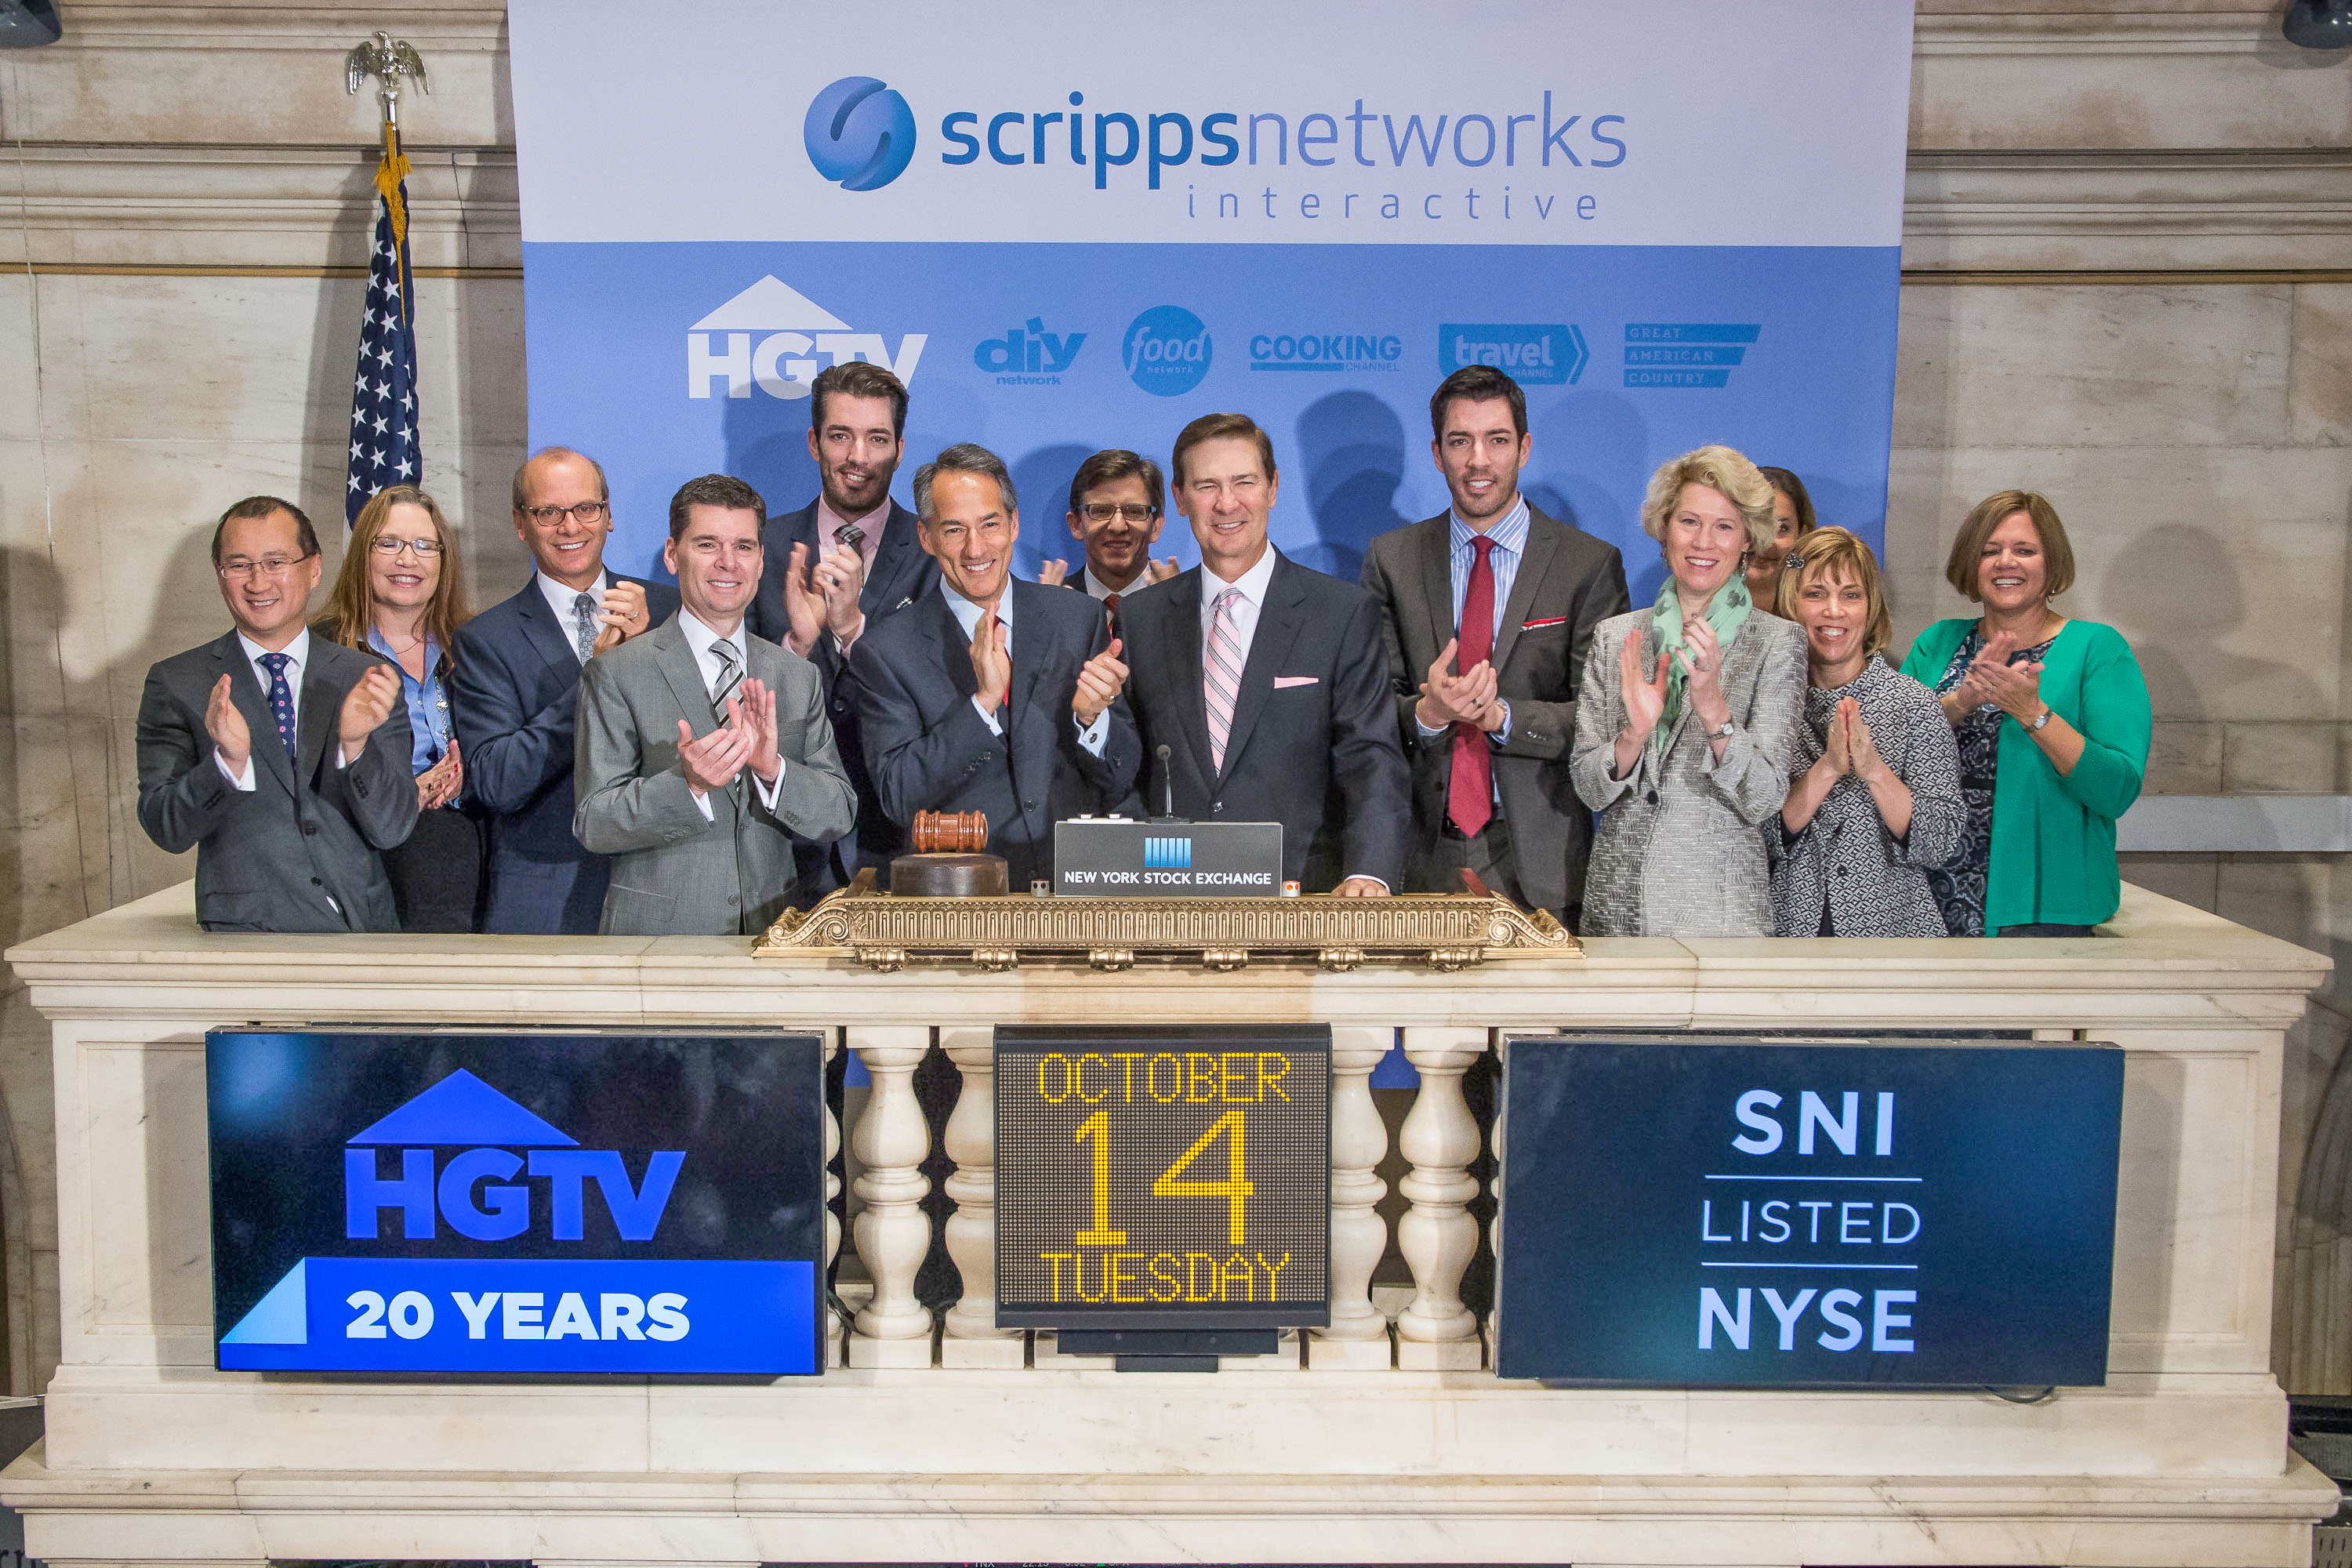 Scripps Networks Interactive Chairman, President and CEO Kenneth Lowe, executive management and HGTV talent Jonathan Scott (L) Drew Scott (R) ring the NYSE opening bell in honor of the 20th Anniversary of HGTV at New York Stock Exchange on October 14, 2014 in New York City.